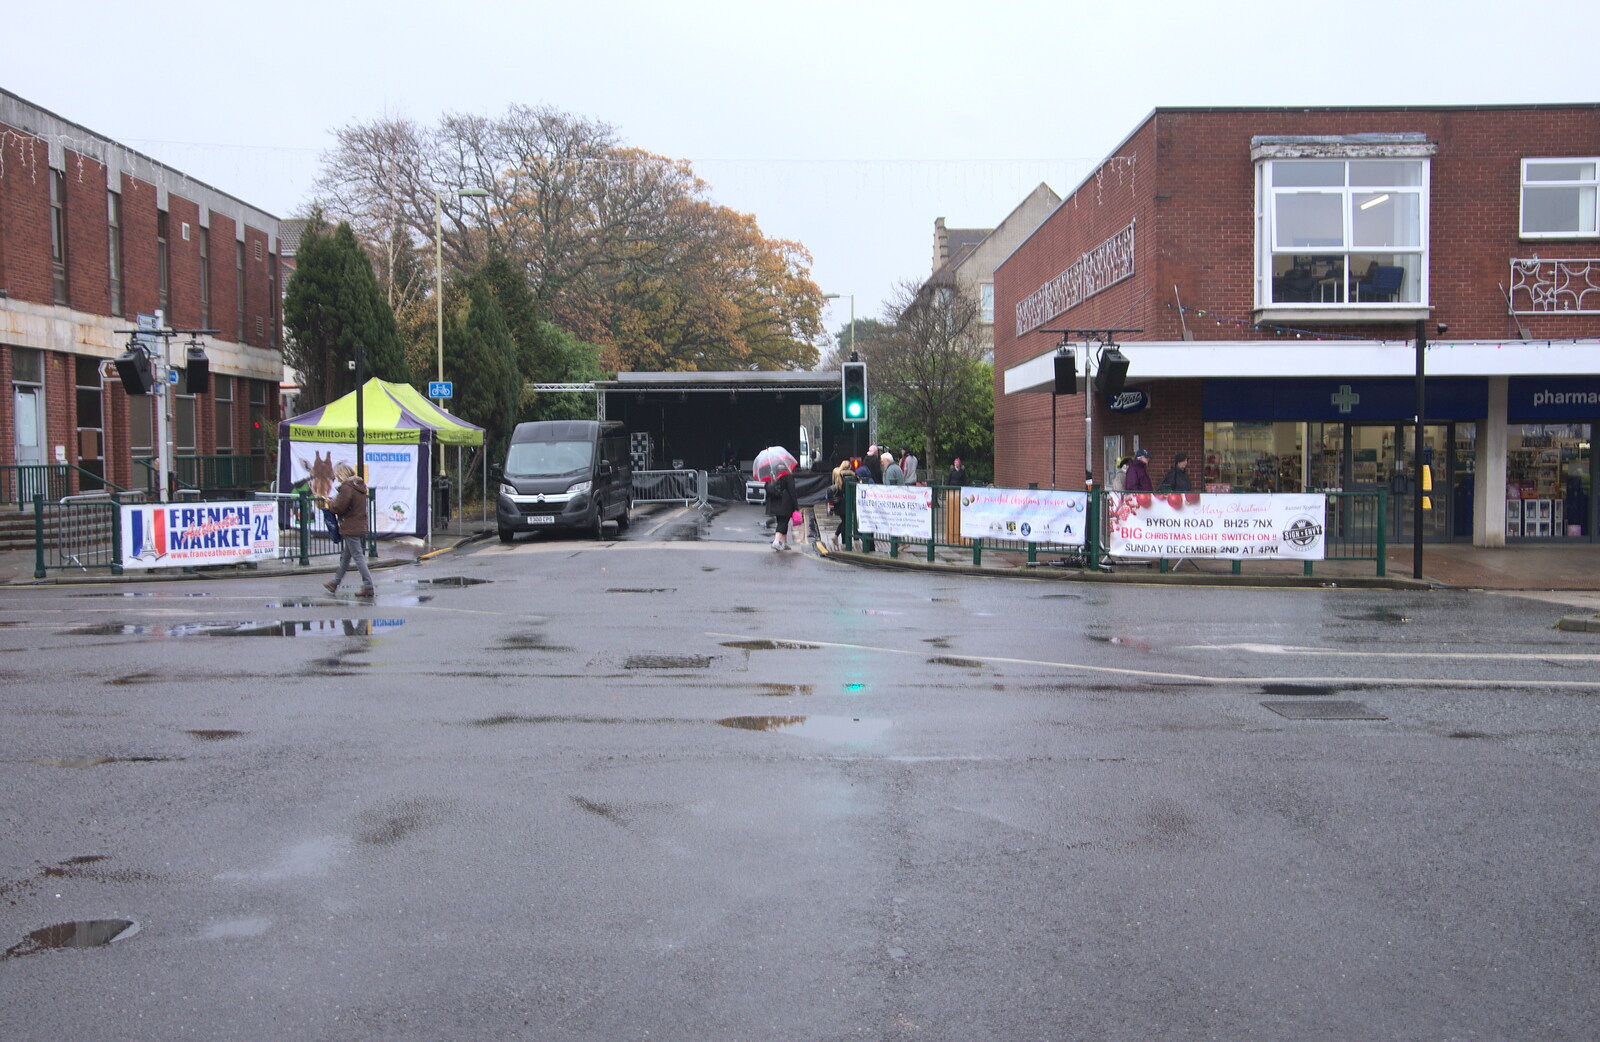 Ashley Road is blocked off by a stage from A Christmas Market, New Milton, Hampshire - 24th November 2018